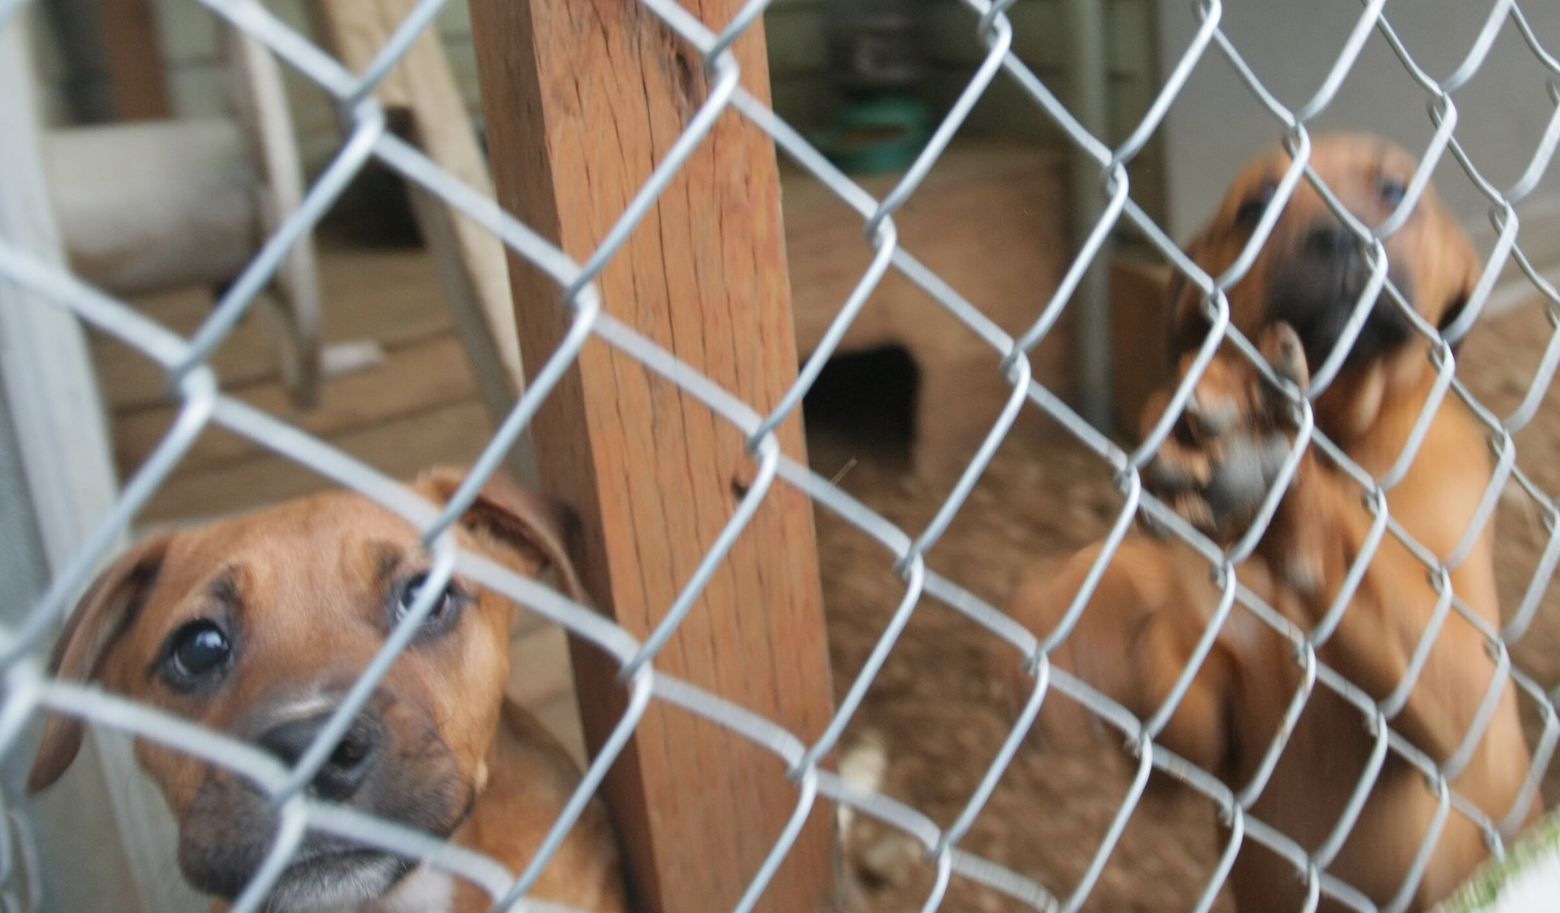 New WA law would shut the door on puppy-mill suffering | The Seattle Times